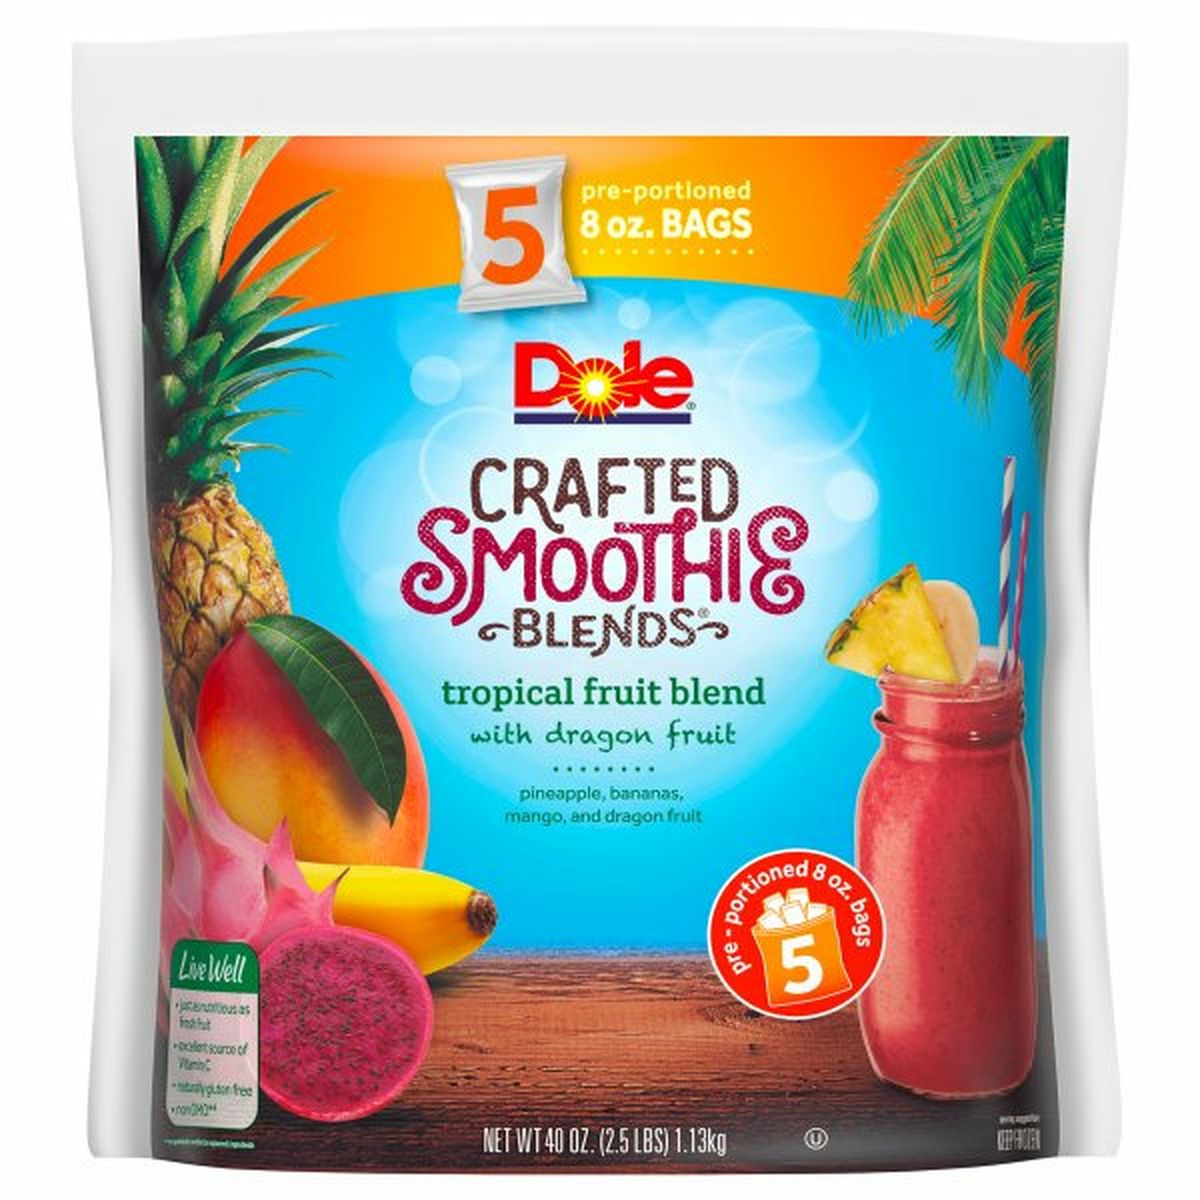 Calories in Dole Smoothie Blends, Crafted, Tropical Fruit Blend with Dragon Fruit, Pre-Portioned Bags